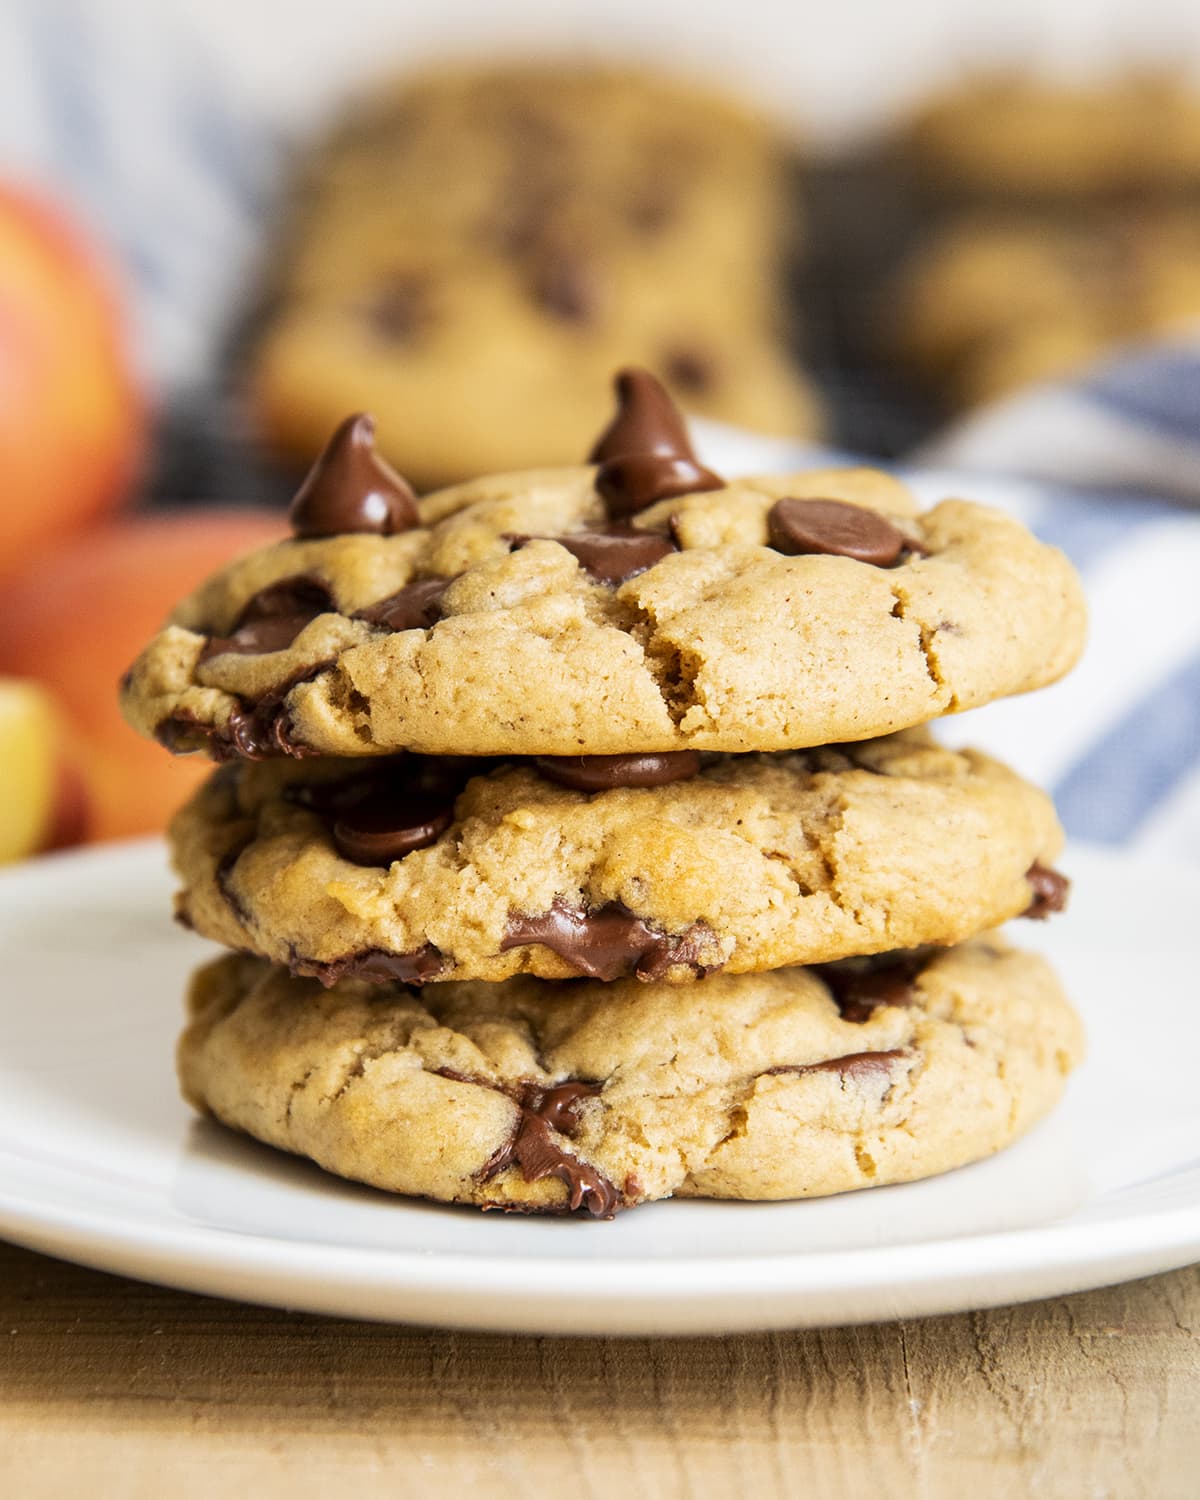 A stack of three applesauce chocolate chip cookies on a plate.